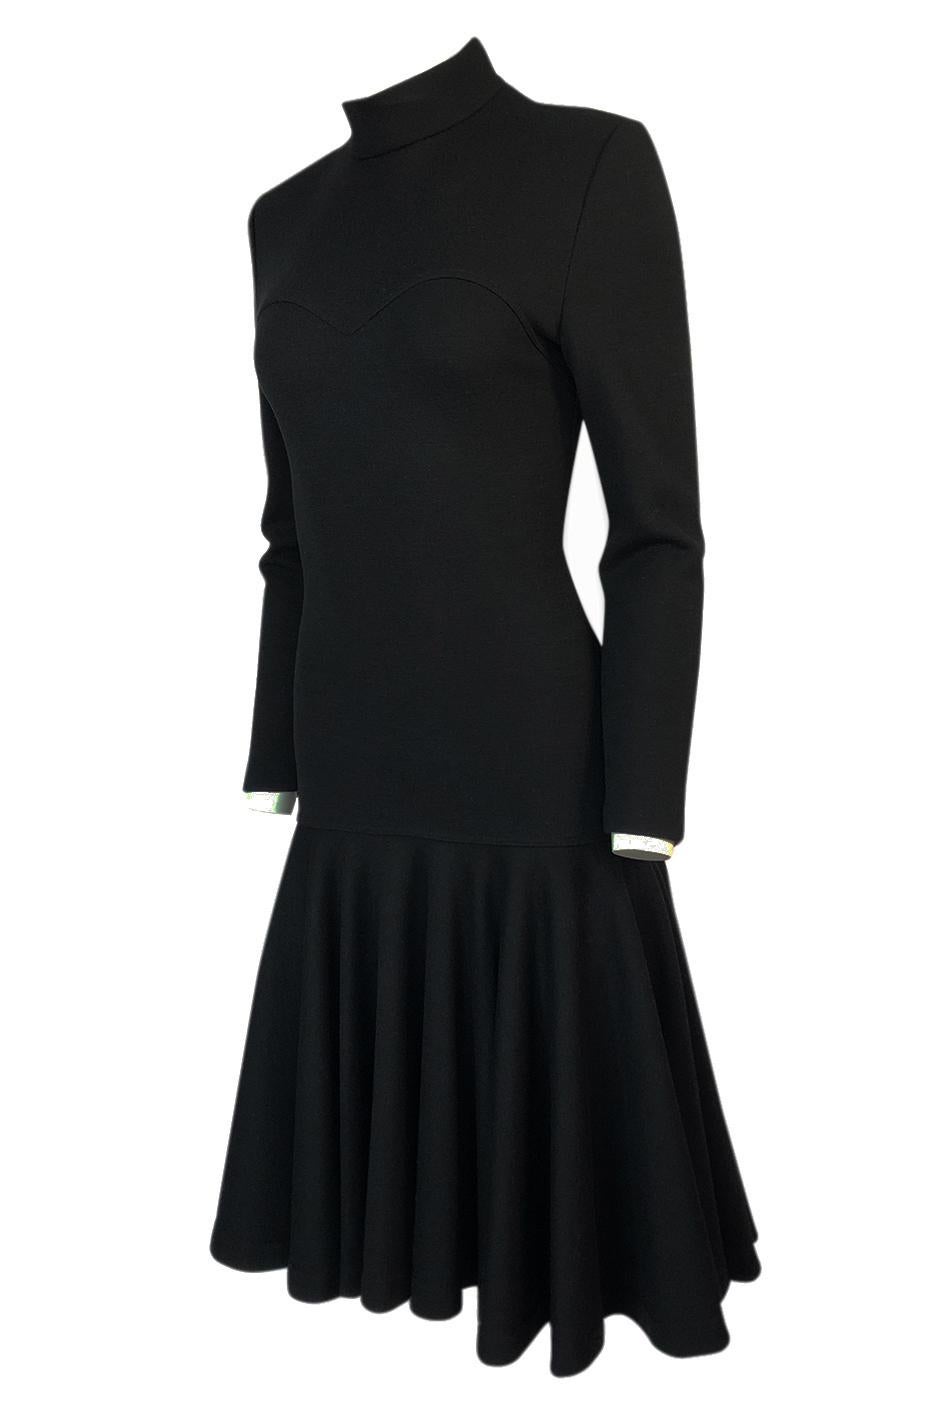 Women's Fall 1988 Patrick Kelly Black Knit Fitted & Flared Skirt Dress